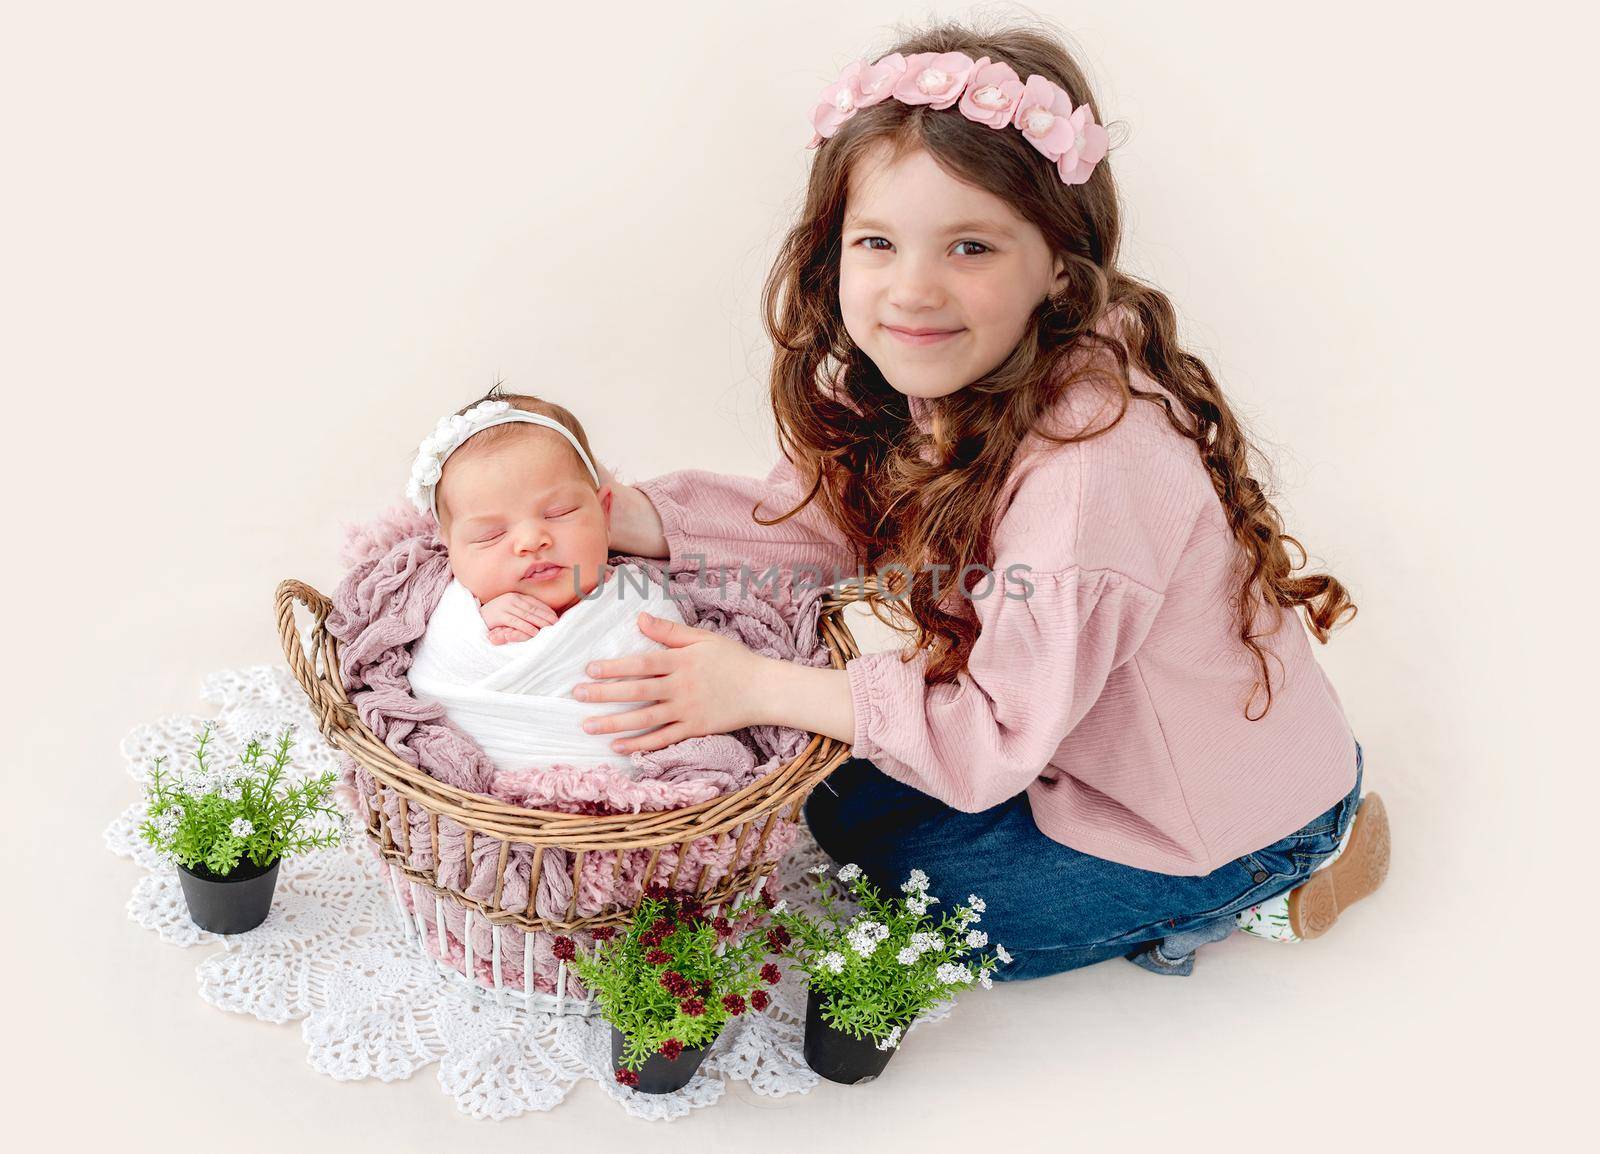 Beautiful little girl smiling and sitting with her swaddled beautiful newborn baby sister sleeping in the basket. Adorable napping kid with her sibling